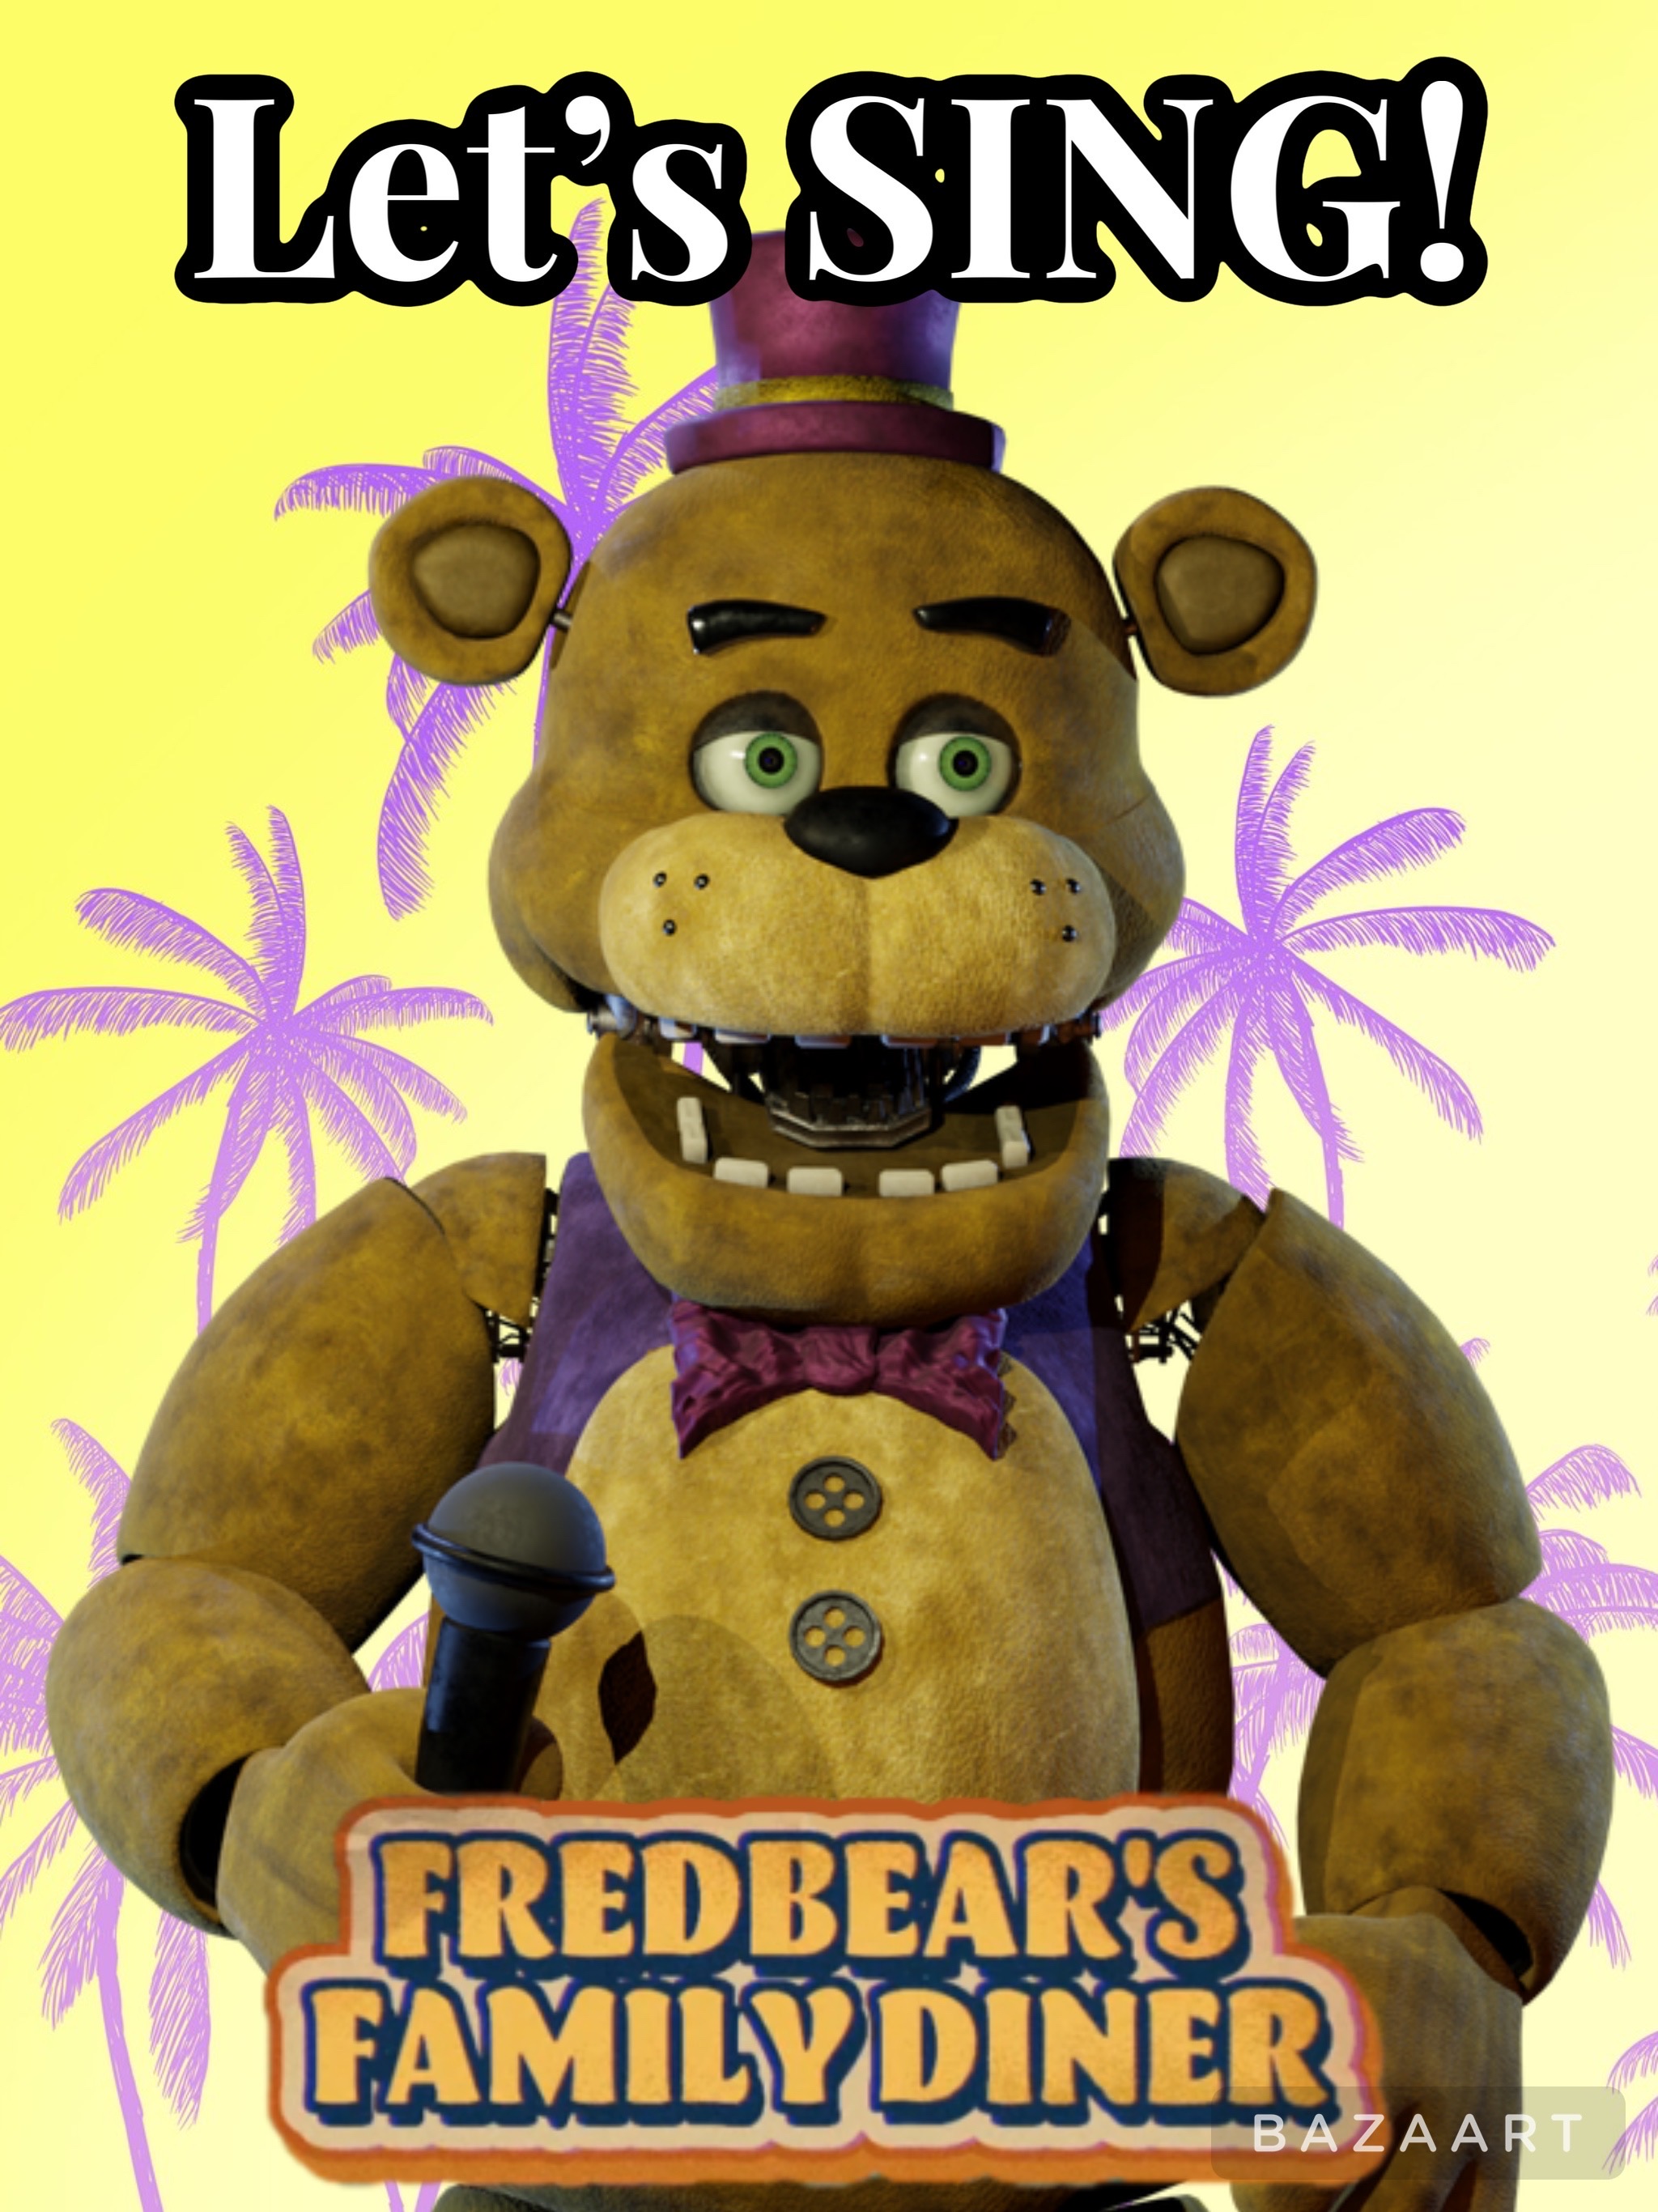 Posters from Fredbear's Family Diner - Forgotten At Fredbear's by Jacorn